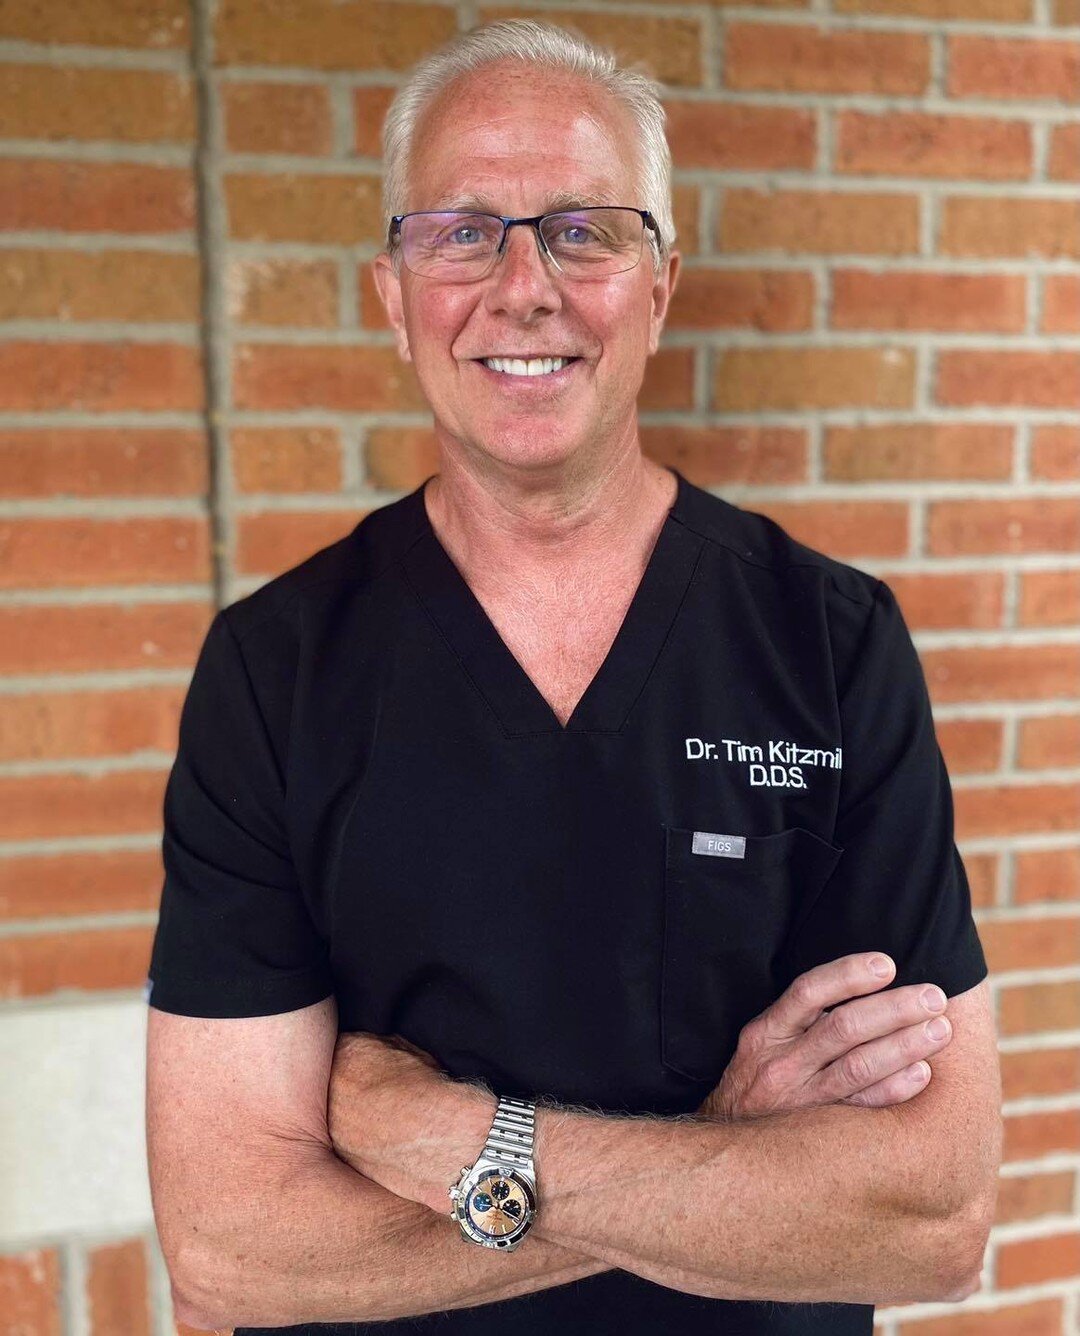 Happy Father&rsquo;s Day to the engine that keeps Cincismiles moving. No matter what type of day you&rsquo;re having, 5 minutes with Dr. Tim is sure to brighten your day and put a big smile on your face. Thank you for all you do for us Dr. Tim. We lo